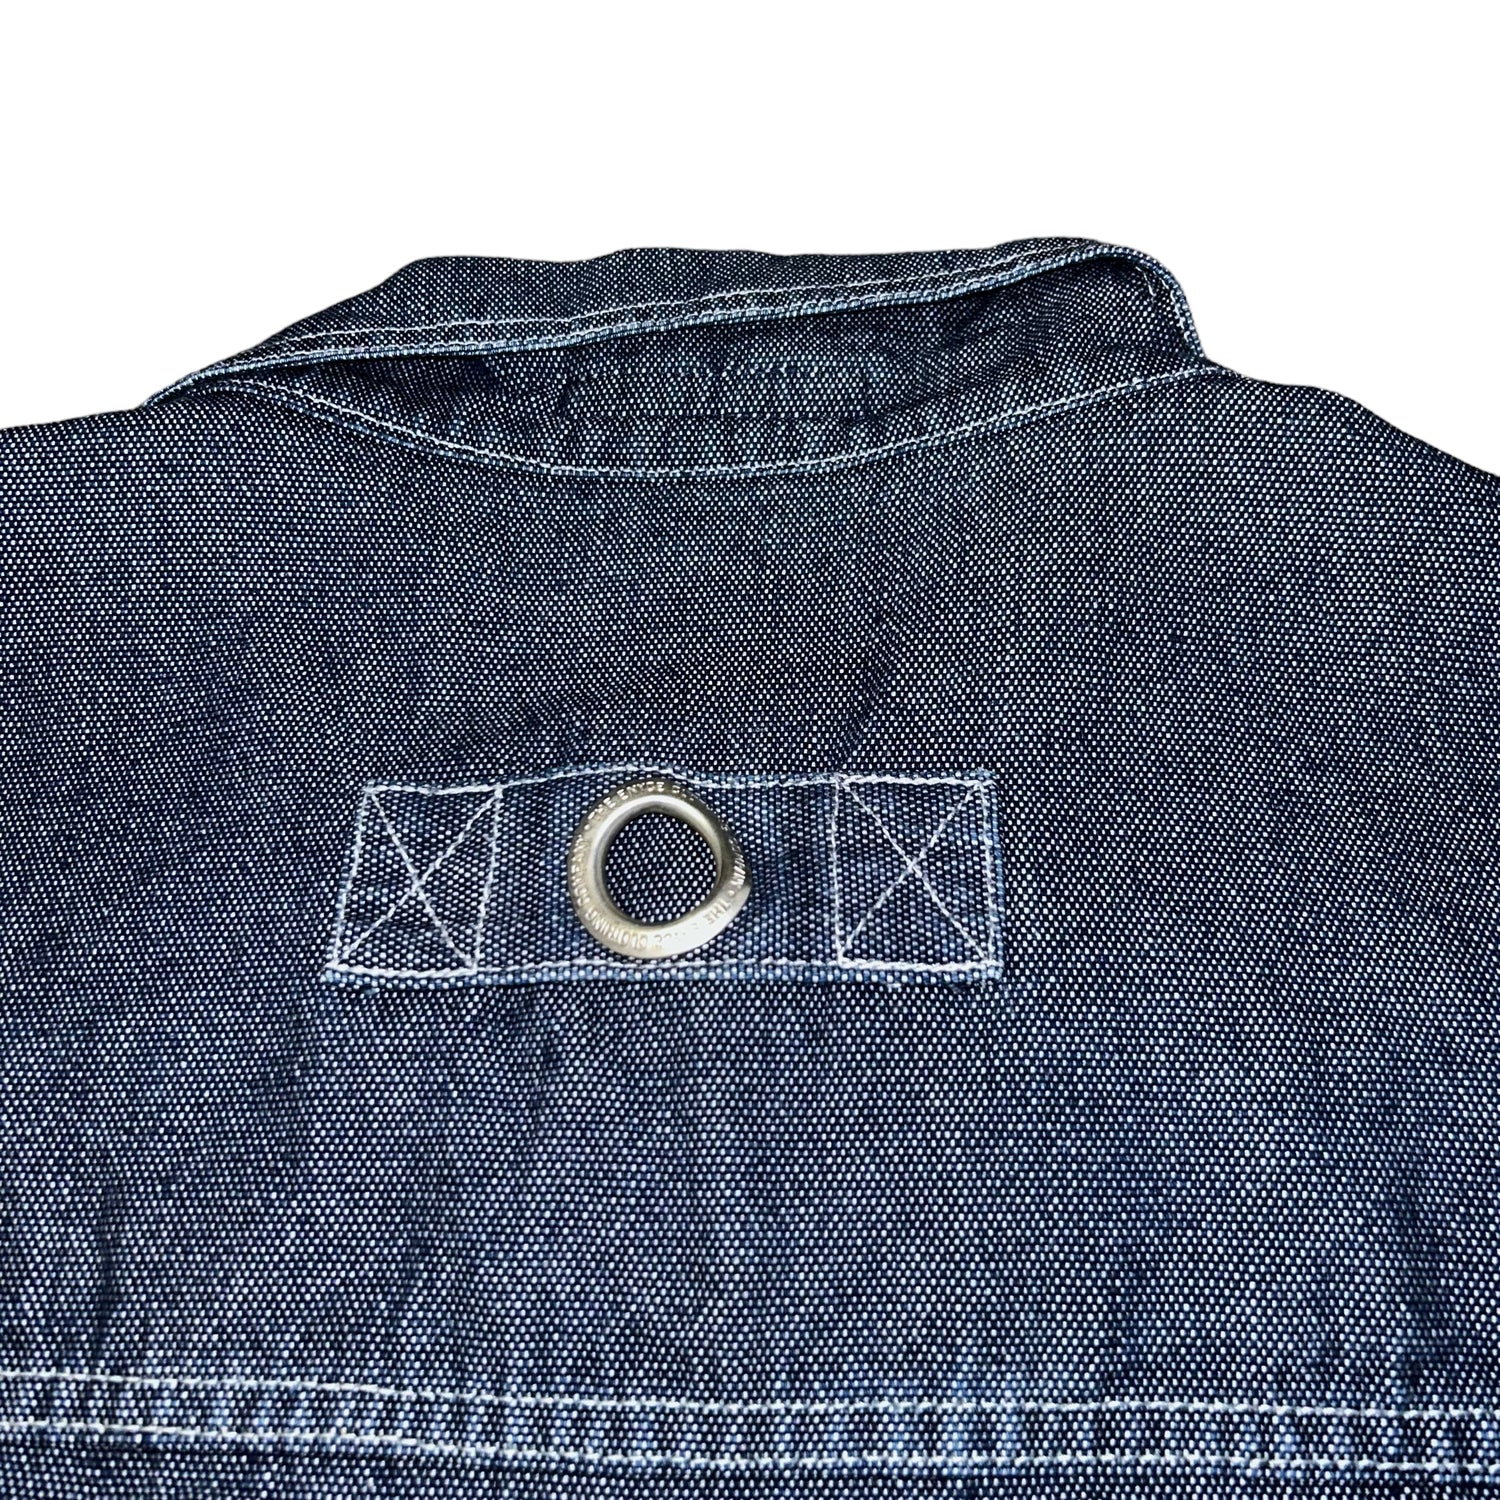 Giacca in jeans Enyce Vintage (XXXL) - oldstyleclothing